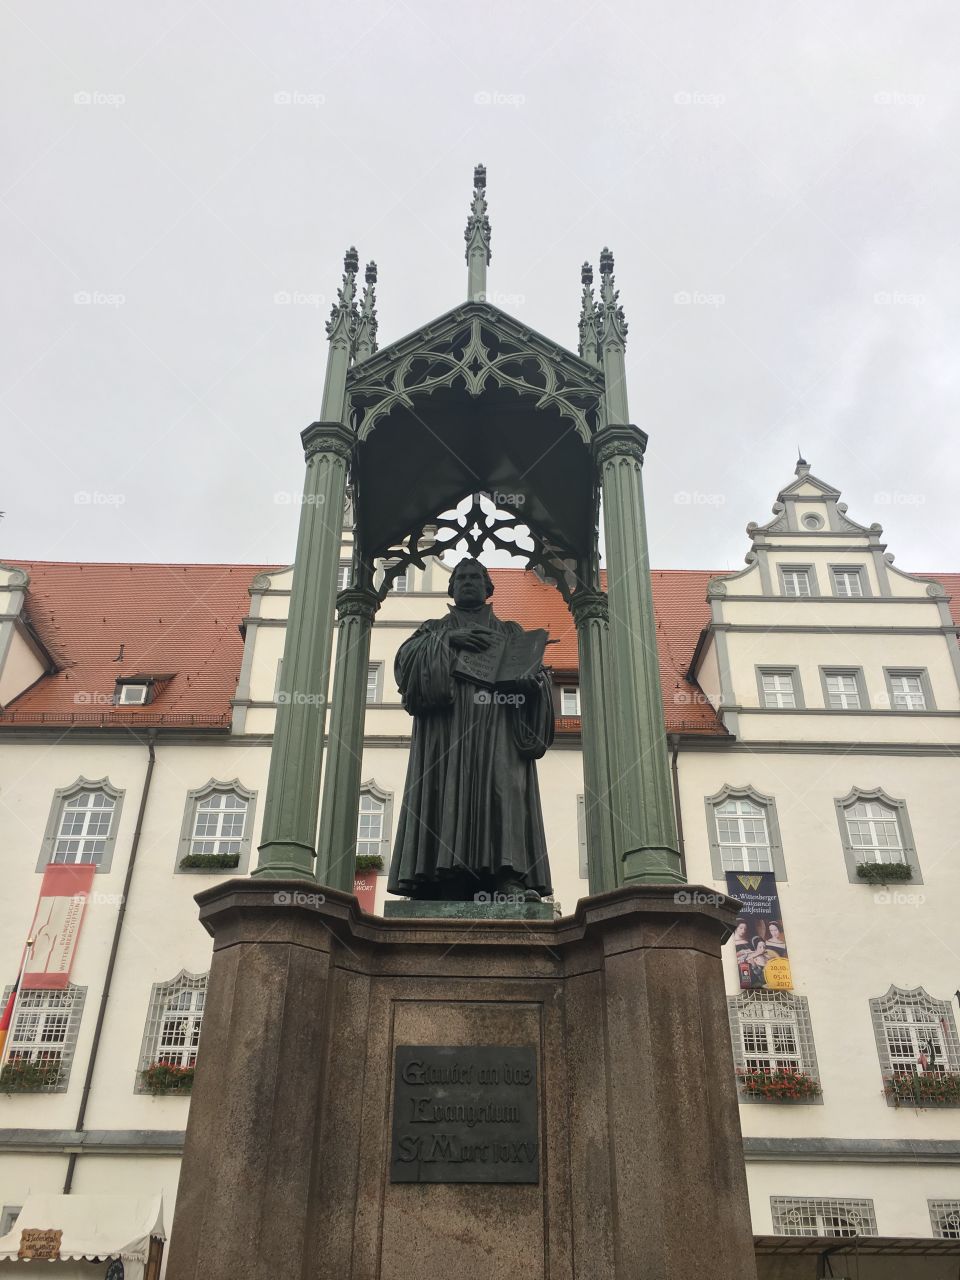 The statue of Martin Luther in Wittenberg, Germany